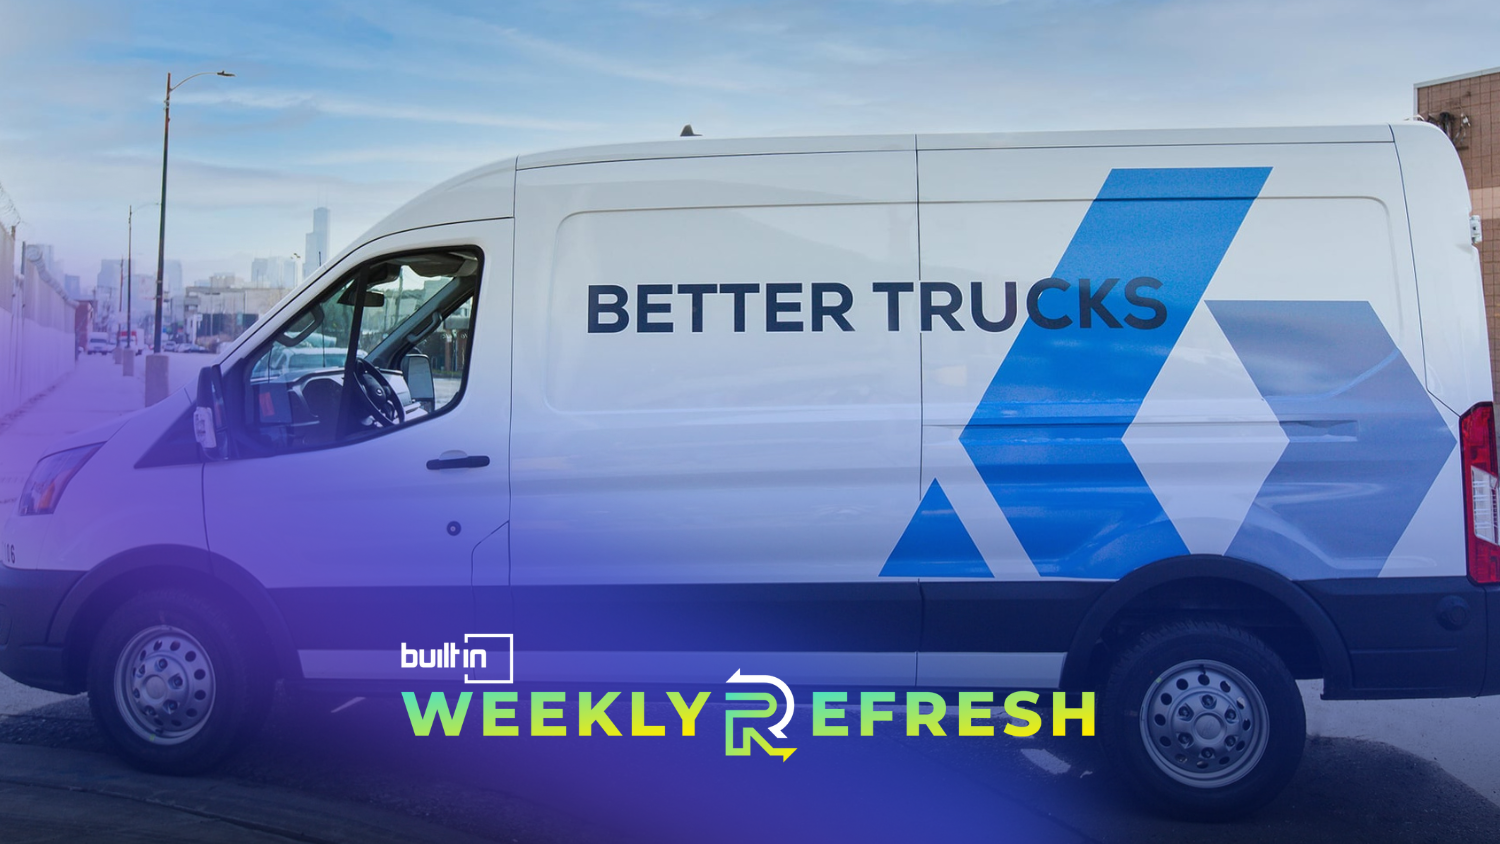 Better Trucks is a last-mile delivery vehicles 